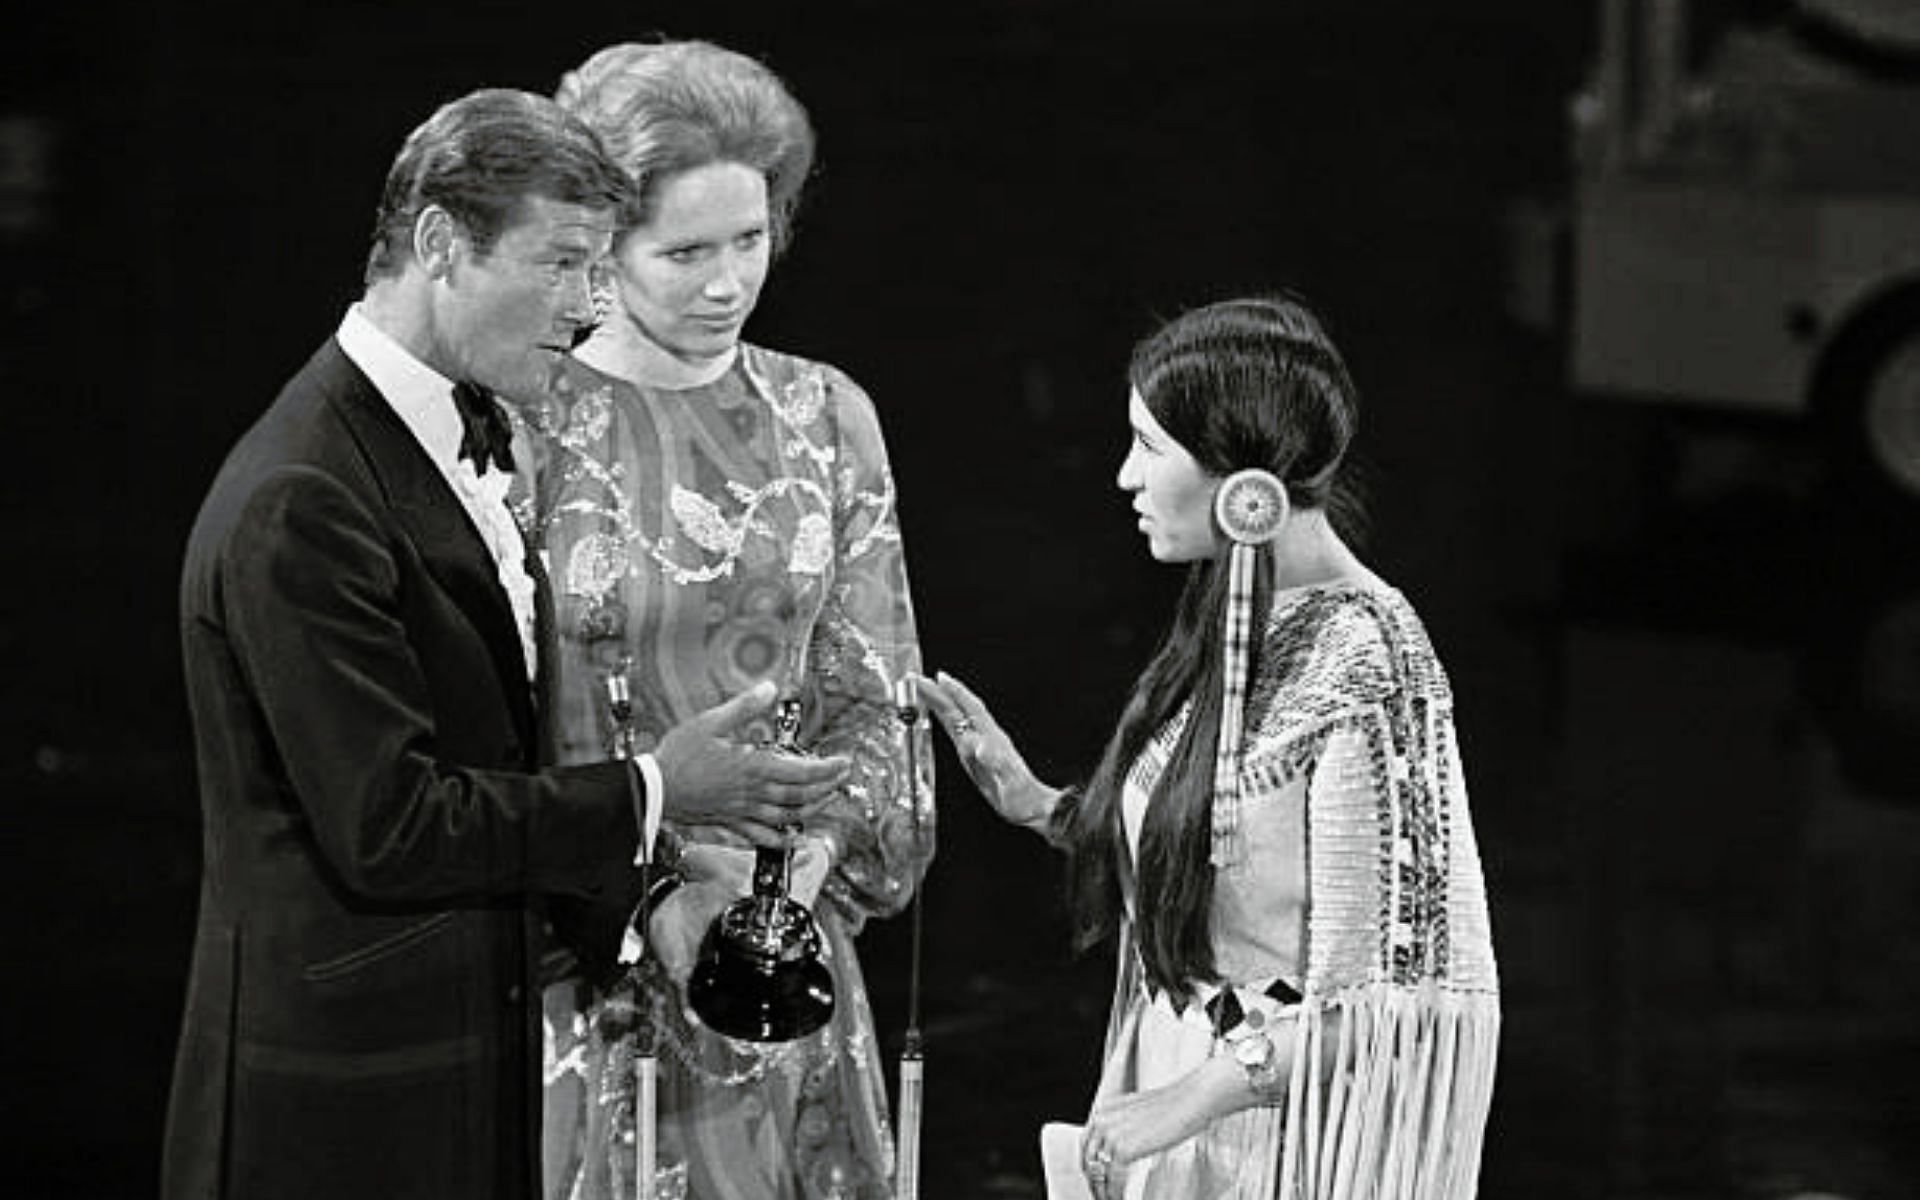 Sacheen Littlefeather representing Marlon Brando at the 1973 Academy Awards (Image via Getty Images)